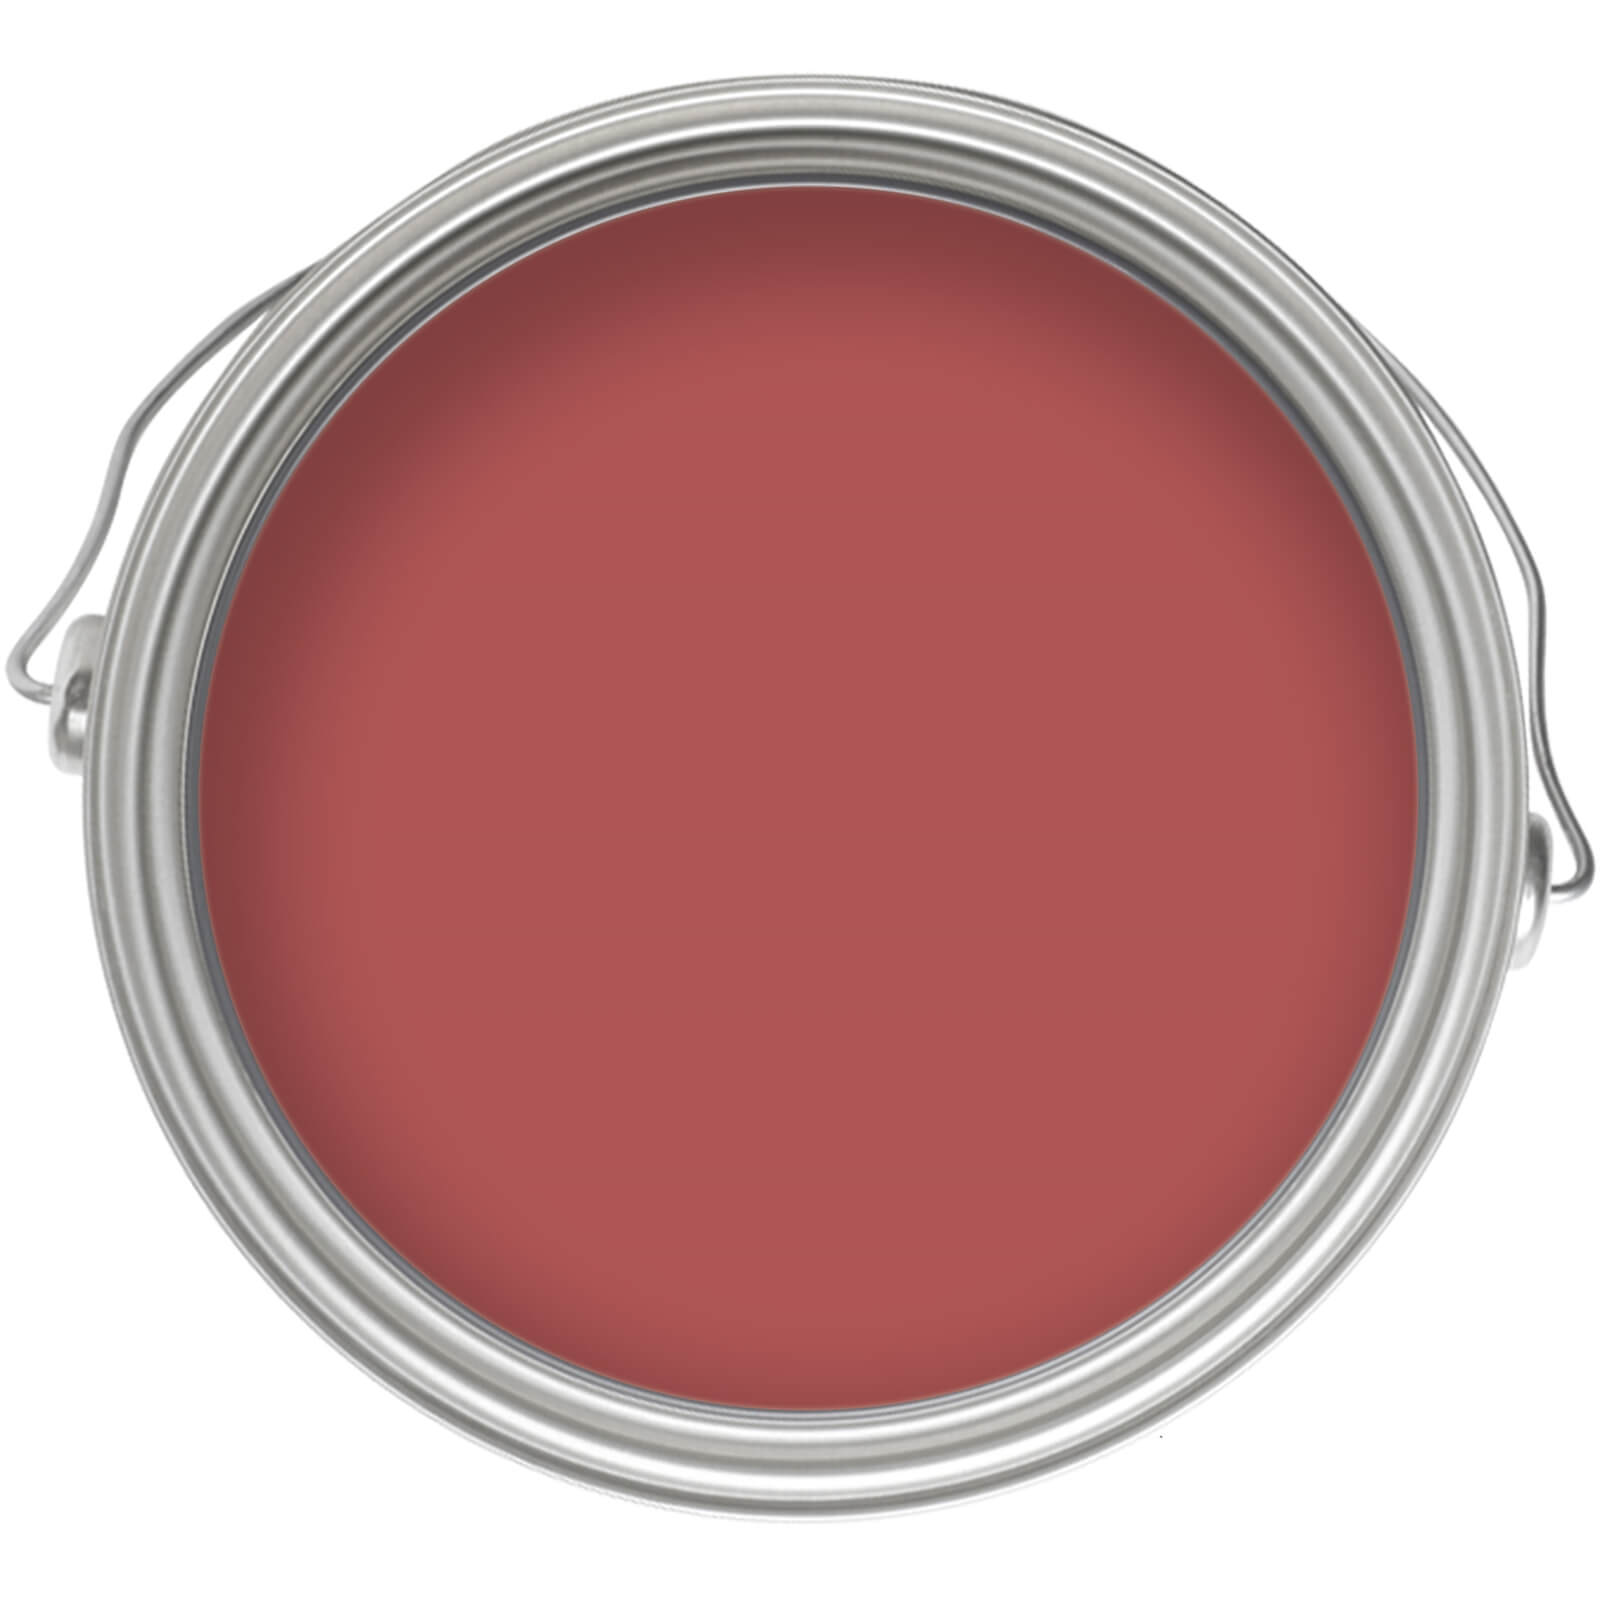 Dulux Once Roasted Red Tester Paint - 30ml